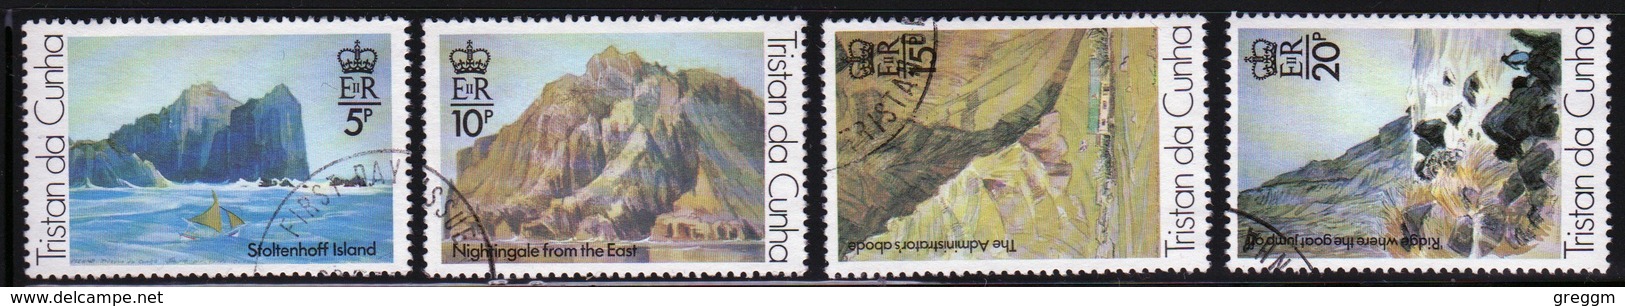 Tristan Da Cunha 1980 Complete Set Of Stamps Commemorating Paintings By Roland Svensson 3rd Series. - Tristan Da Cunha